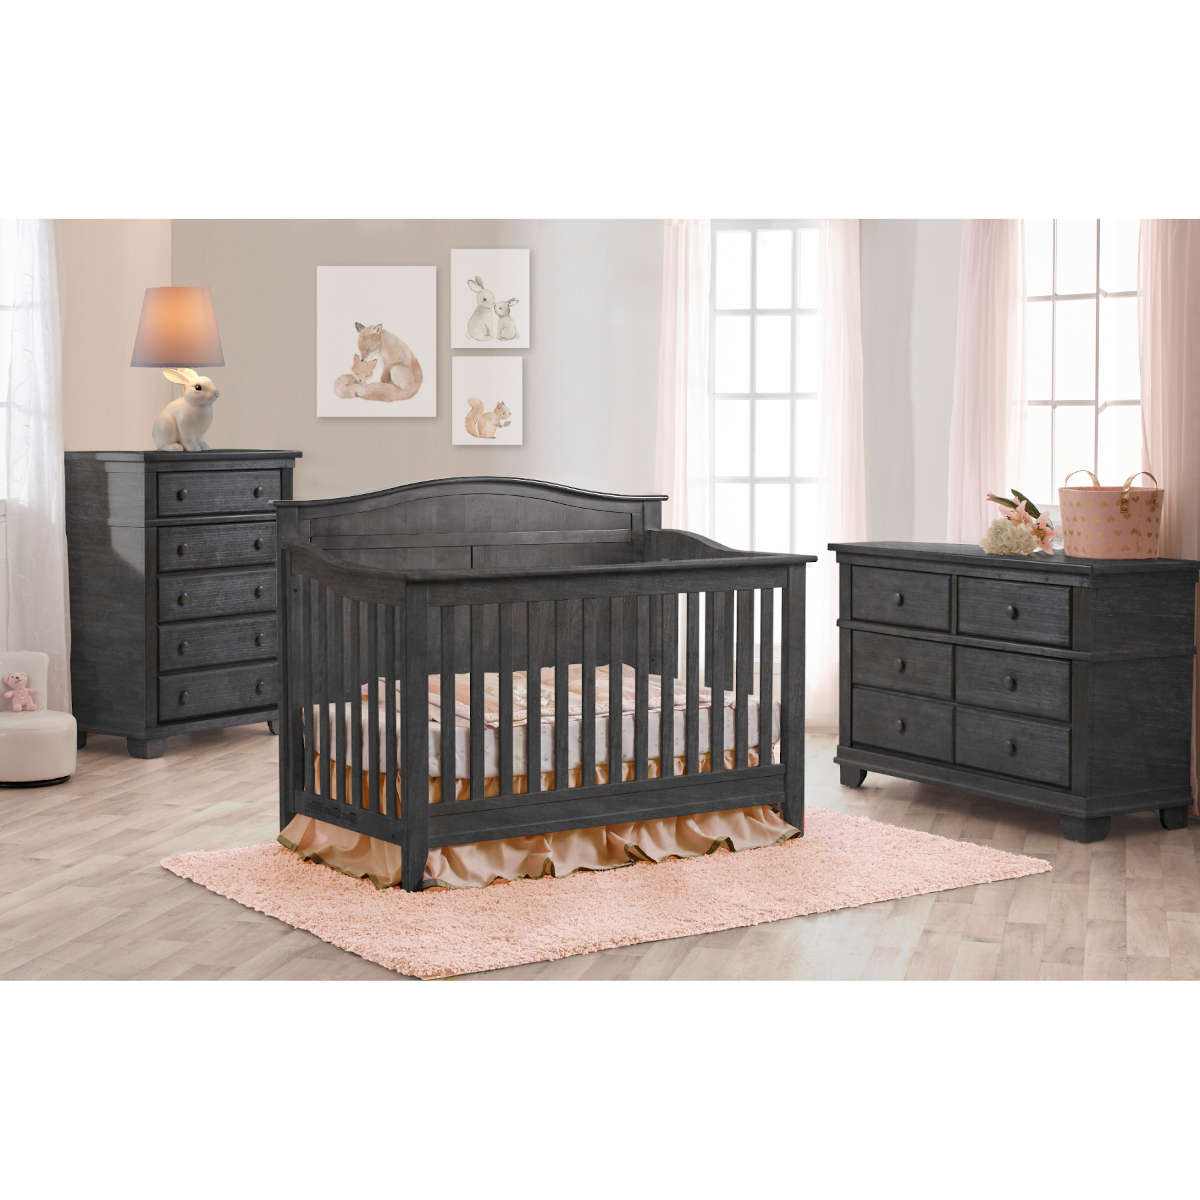 Pali Potenza Arch Top Crib + Double Dresser + 5-Drawer Chest - Twinkle Twinkle Little One